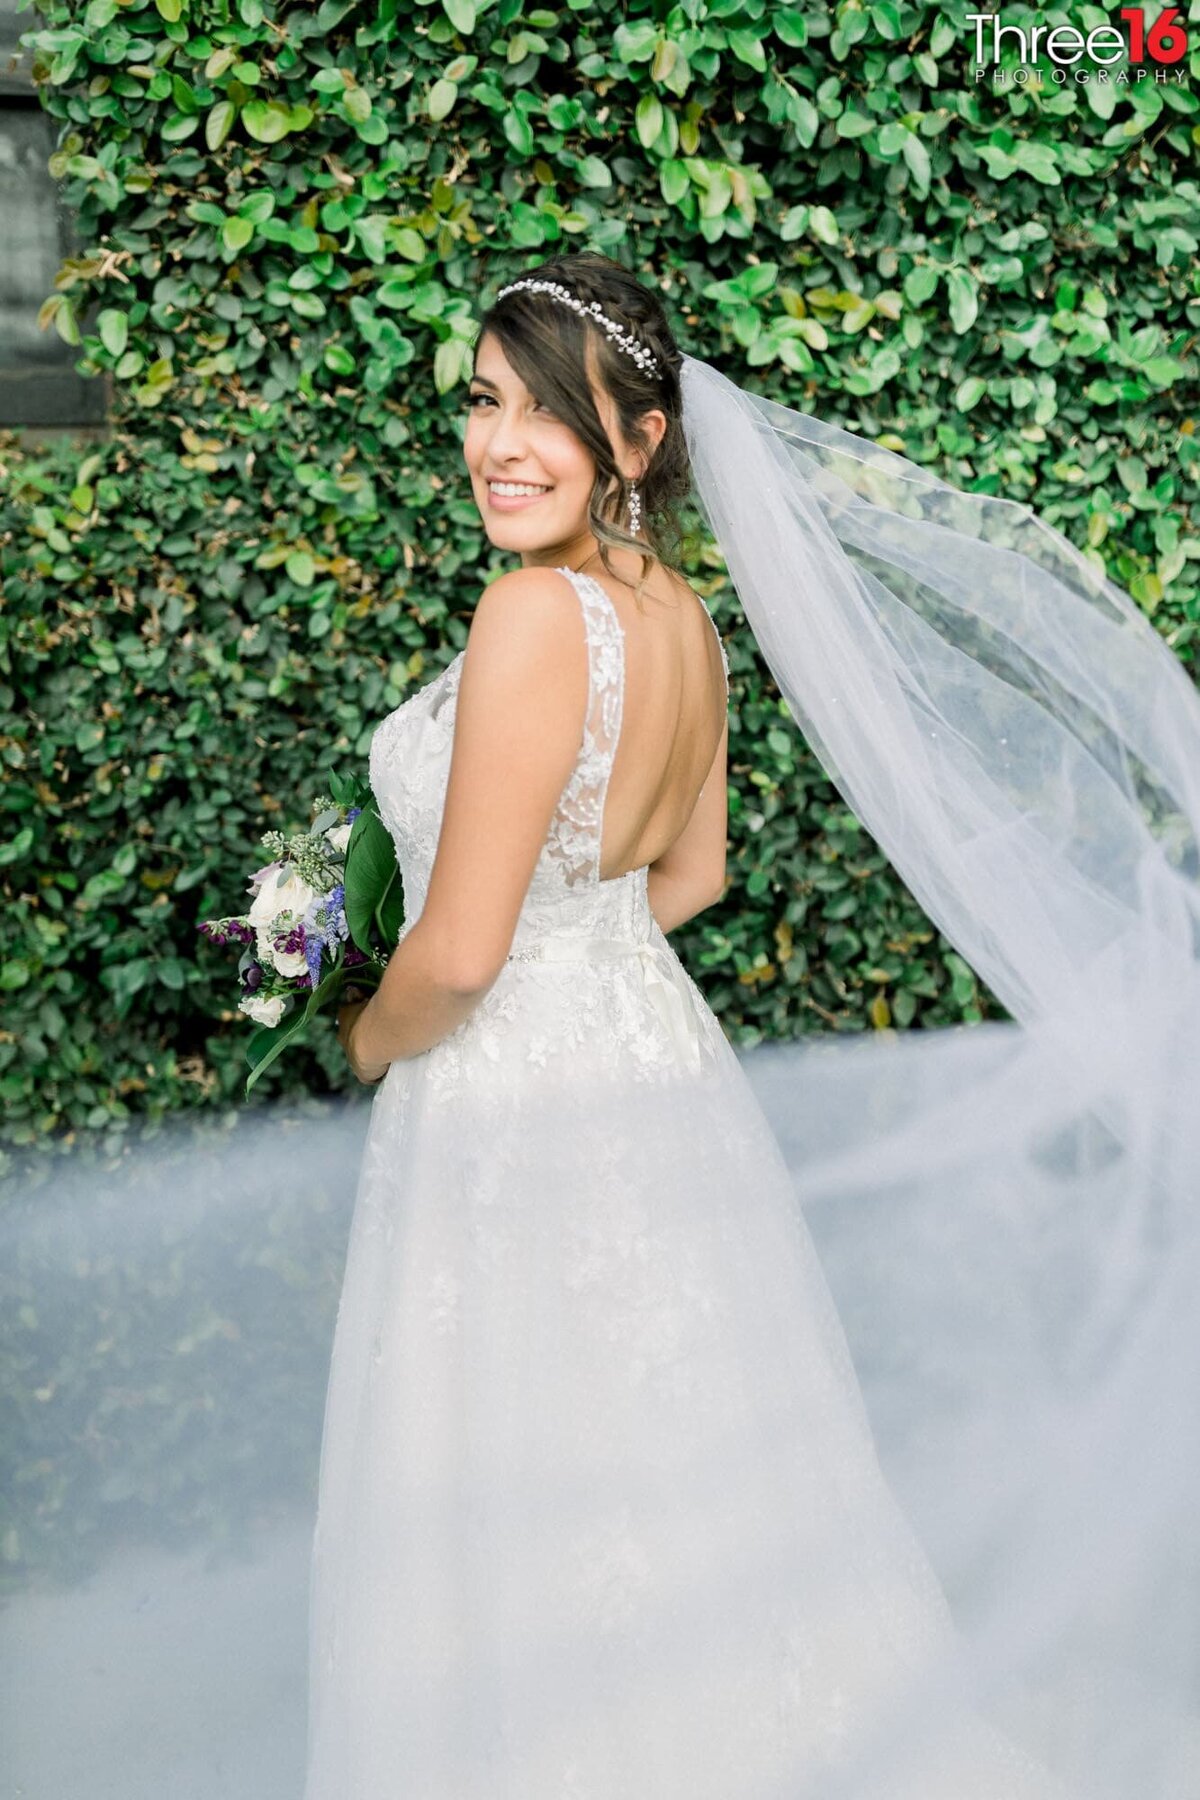 Gorgeous Bride poses as her veil flows in the wind